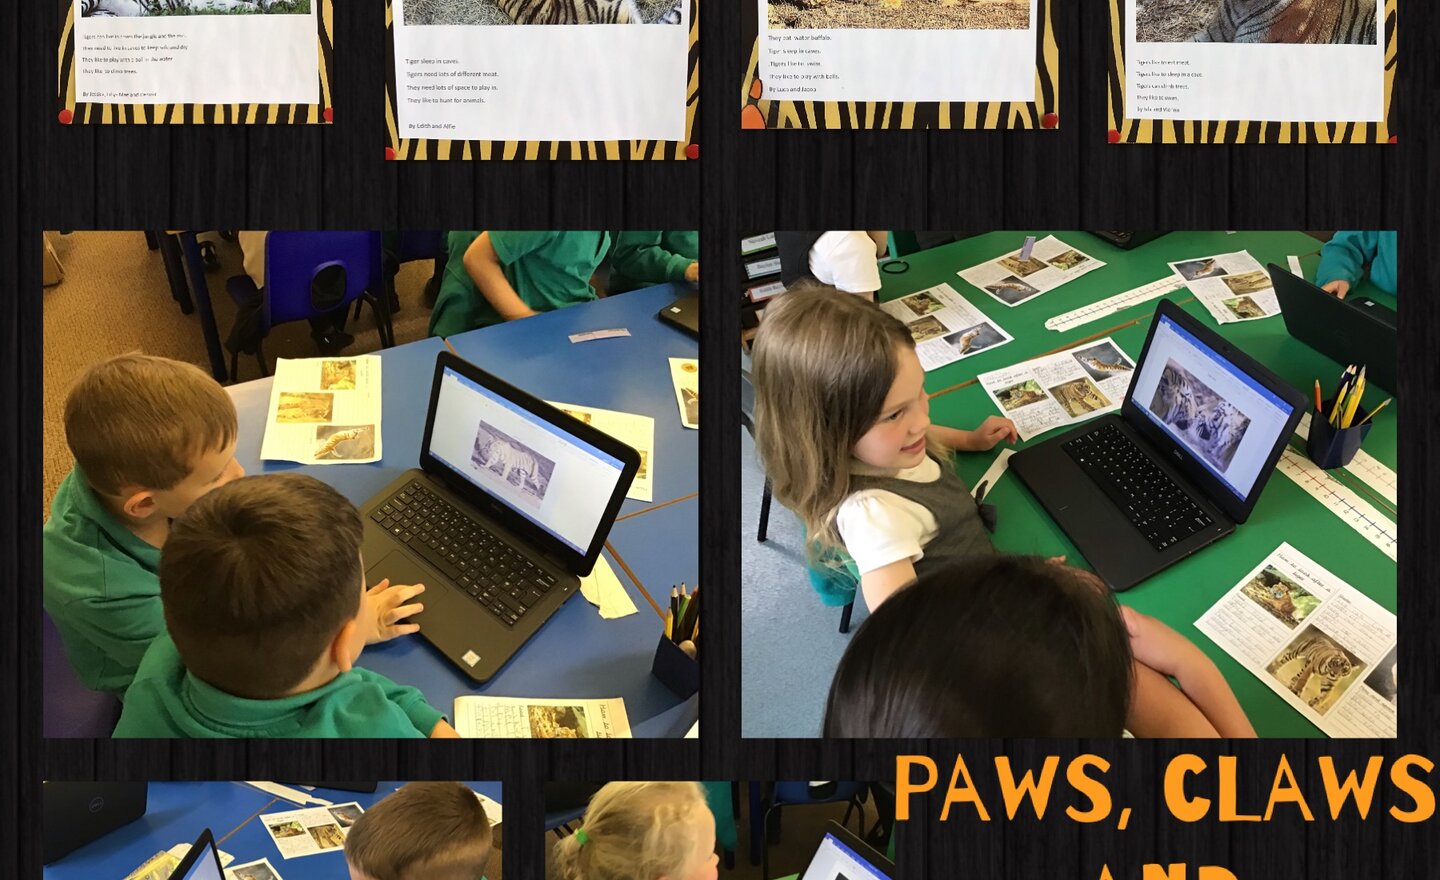 Image of Paws, claws and laptops